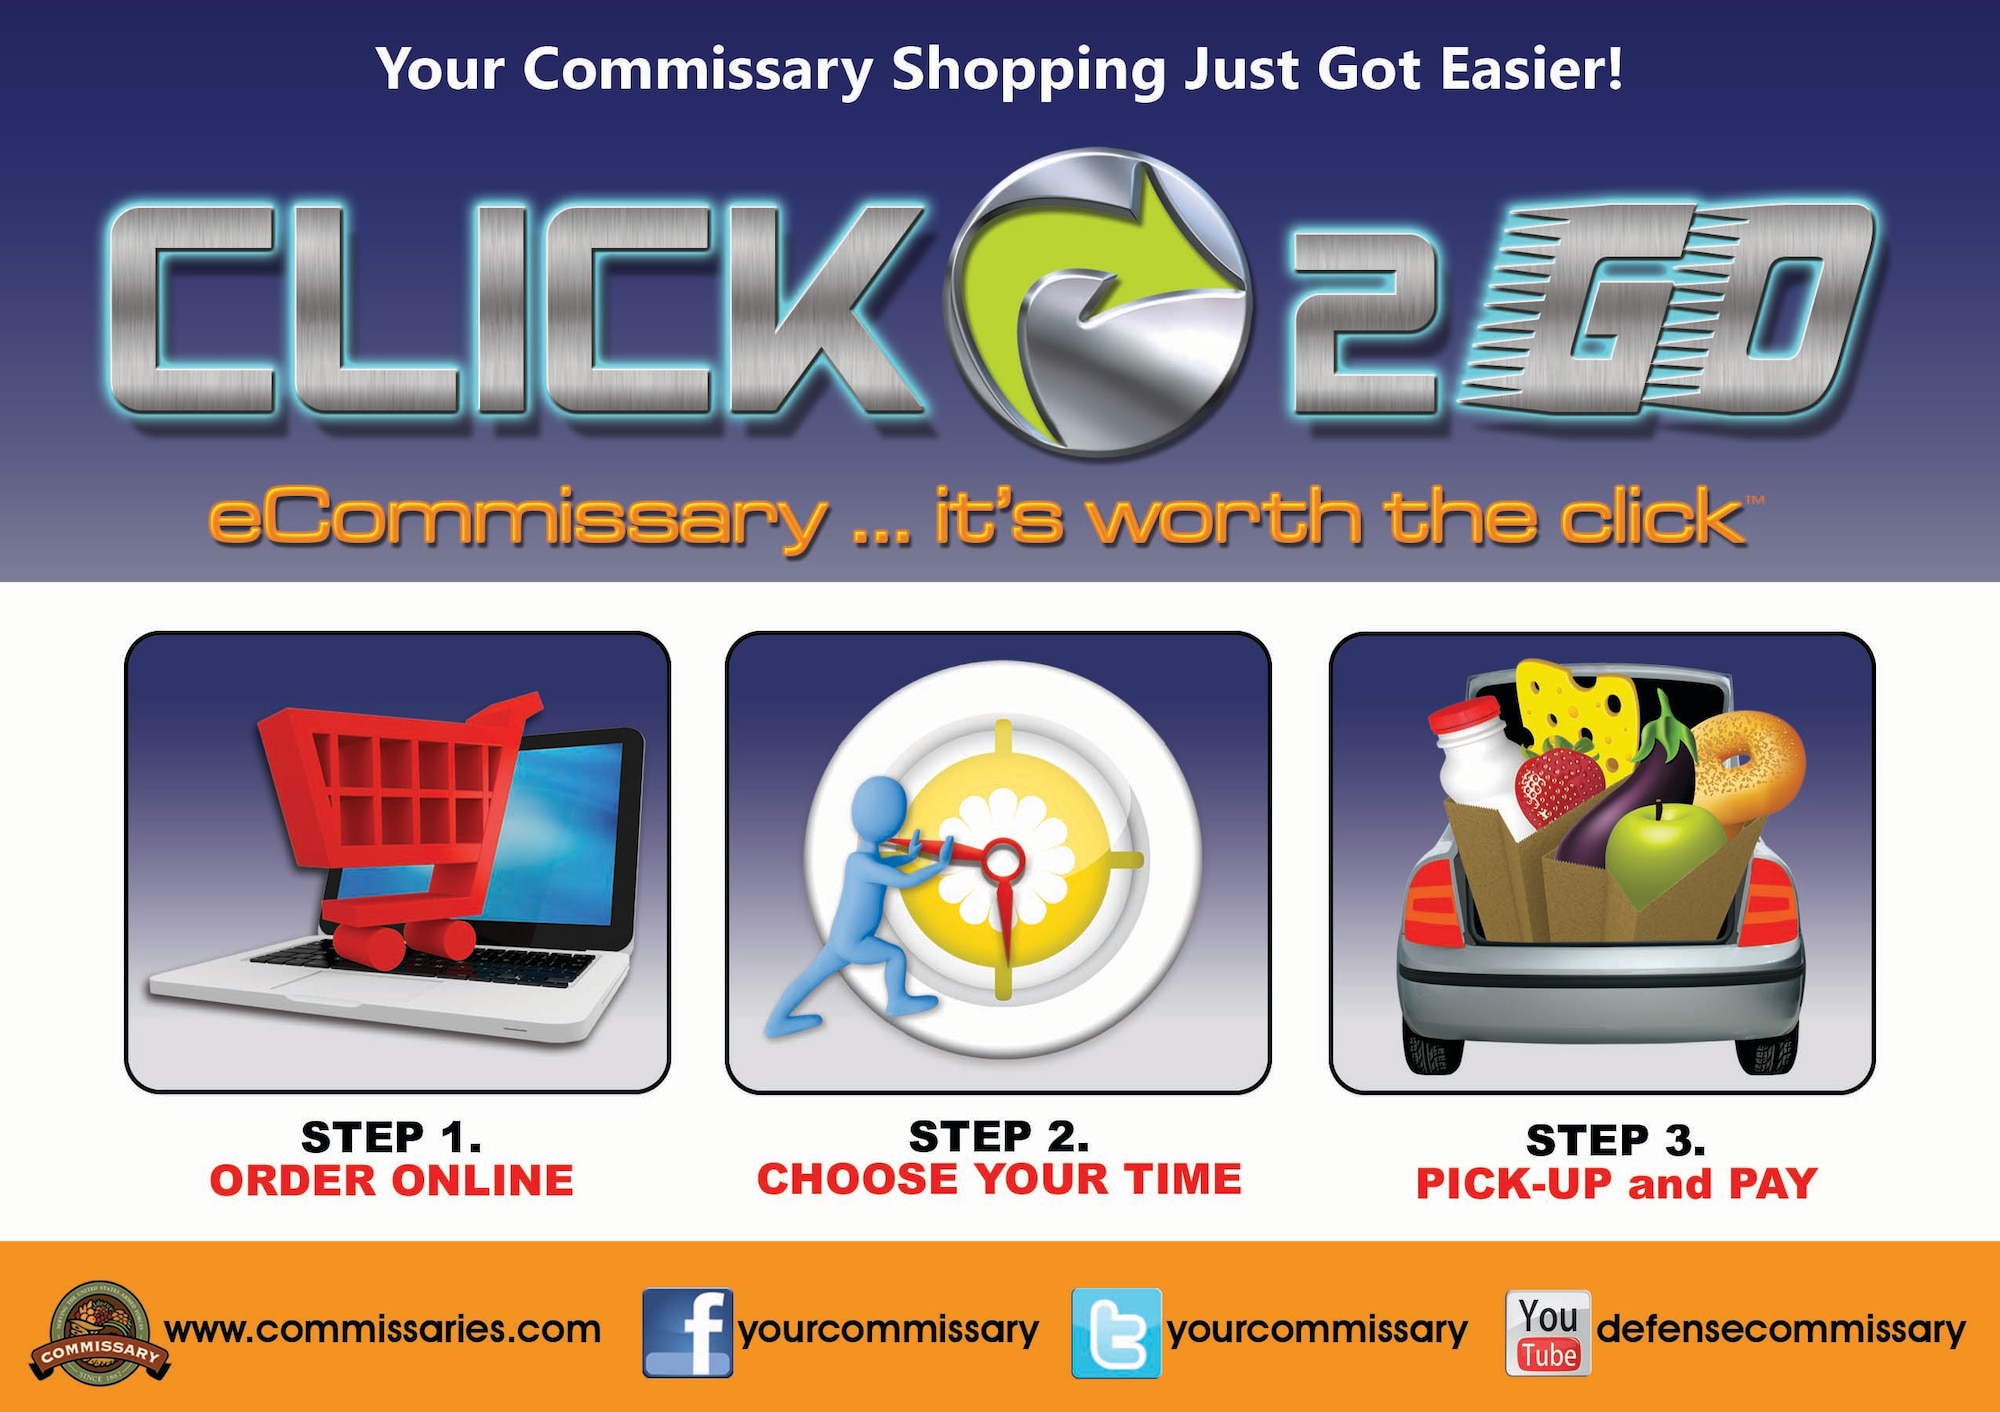 On Sept. 25, 2013, Offutt Air Force Base, Neb. joins Fort Lee, Va., as the second of three locations where the Defense Commissary Agency will test a new internet-ordering and curbside pickup service. (Courtesy Graphic)